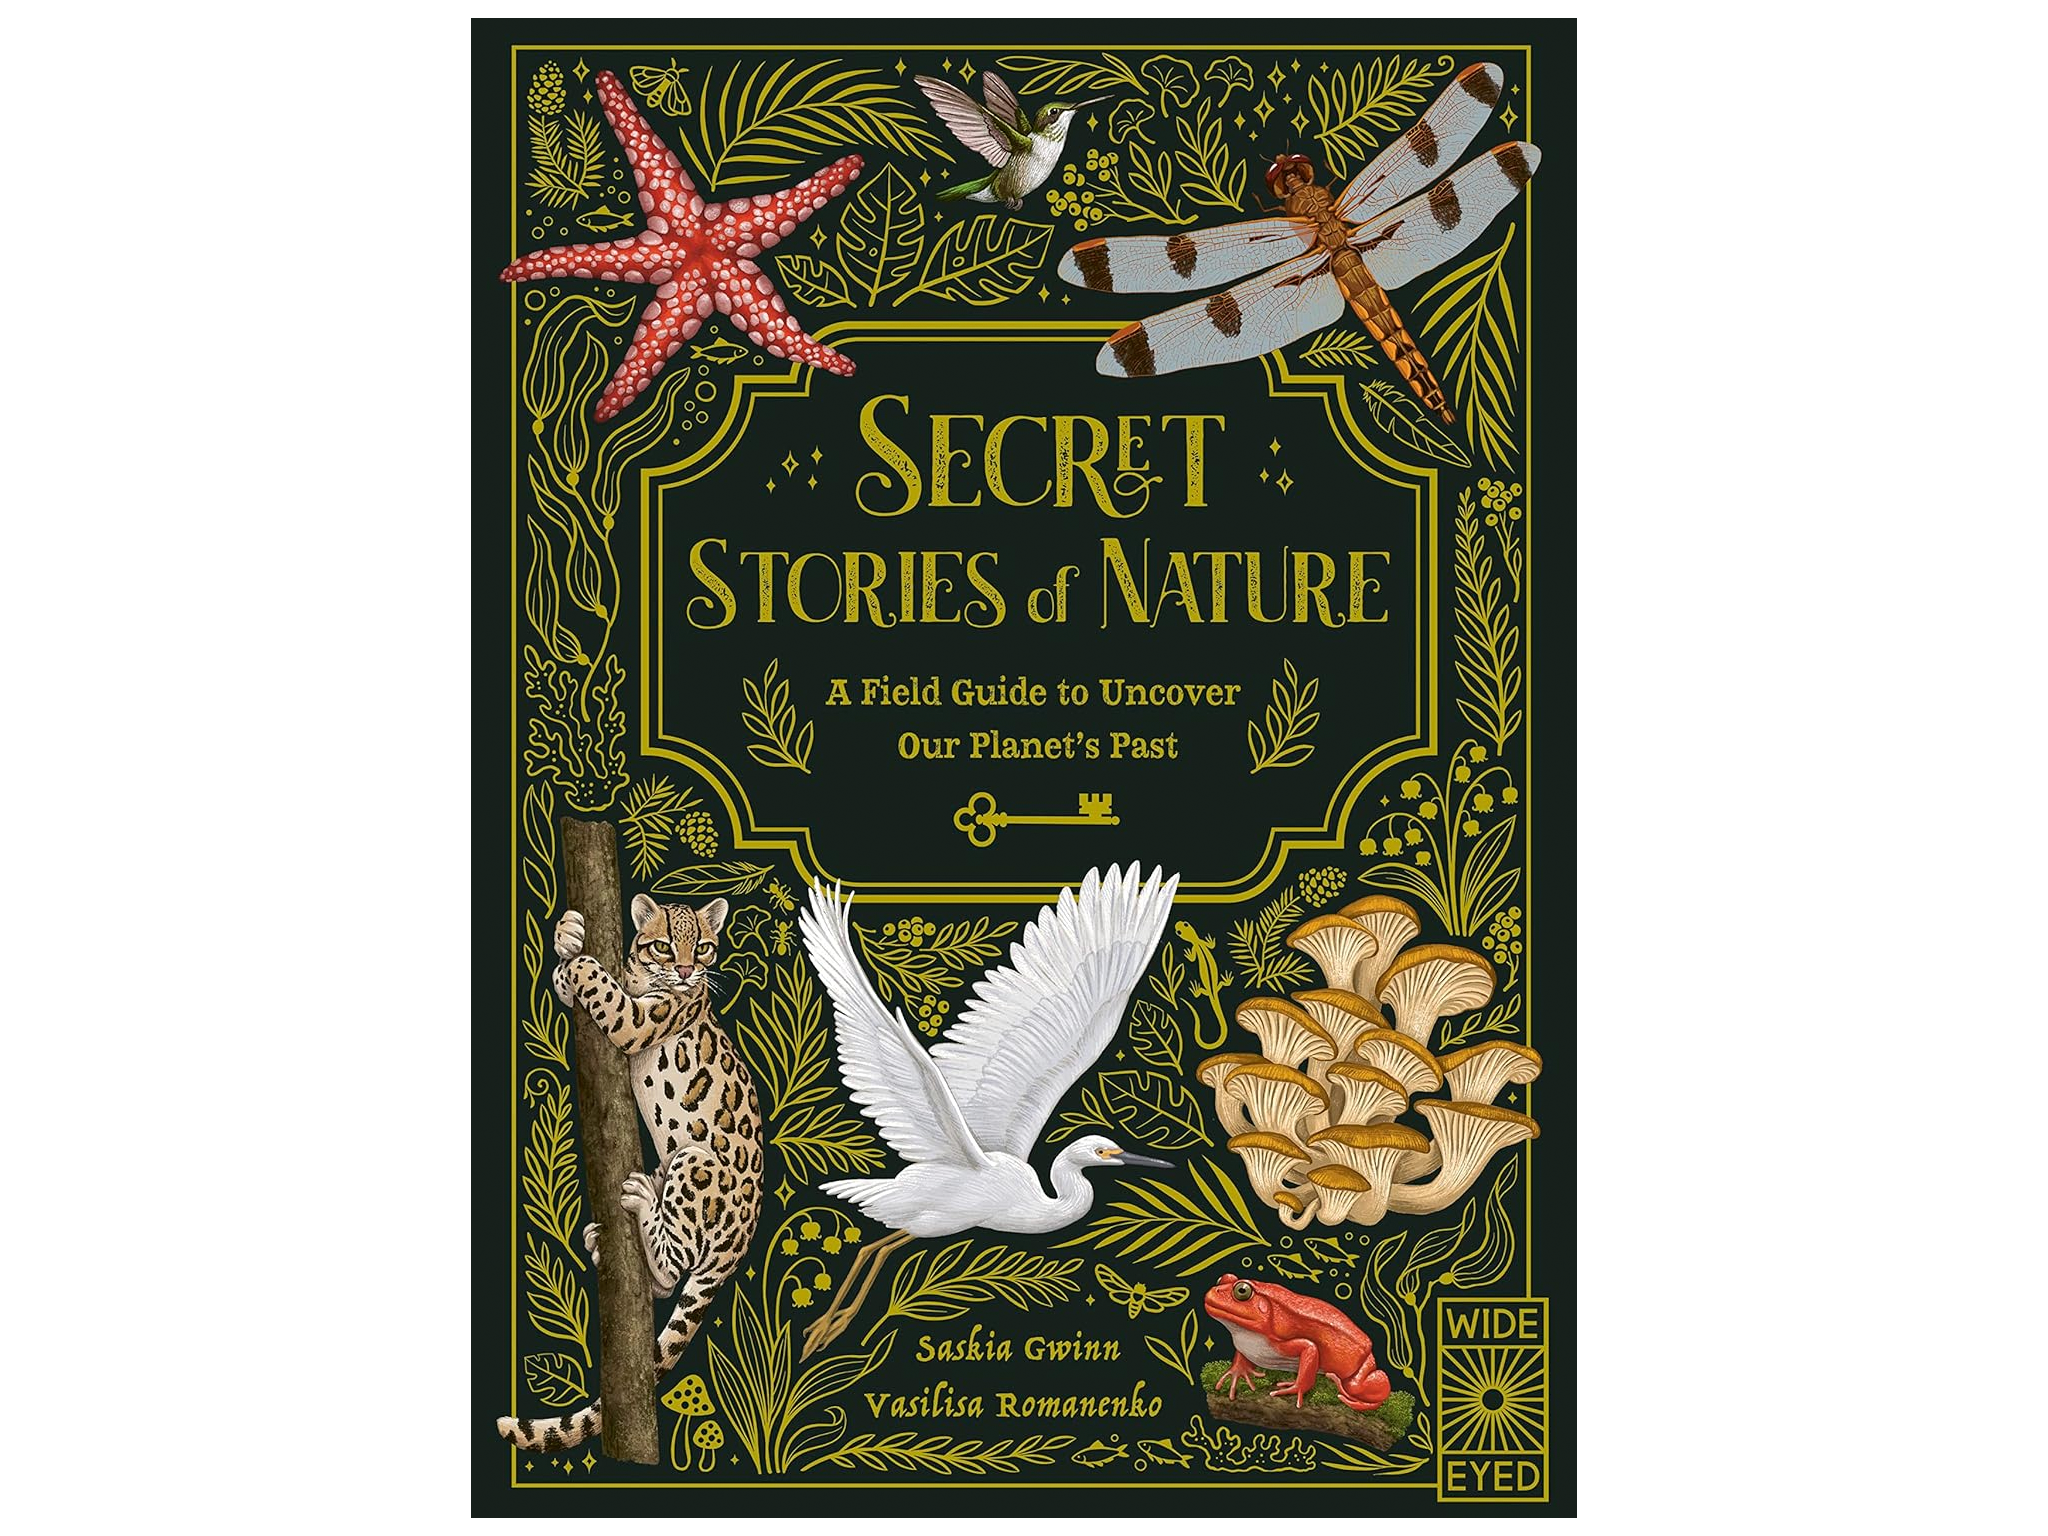 Secret-stories-of-nature-best-gifts-for-8-year-olds-review-indybest